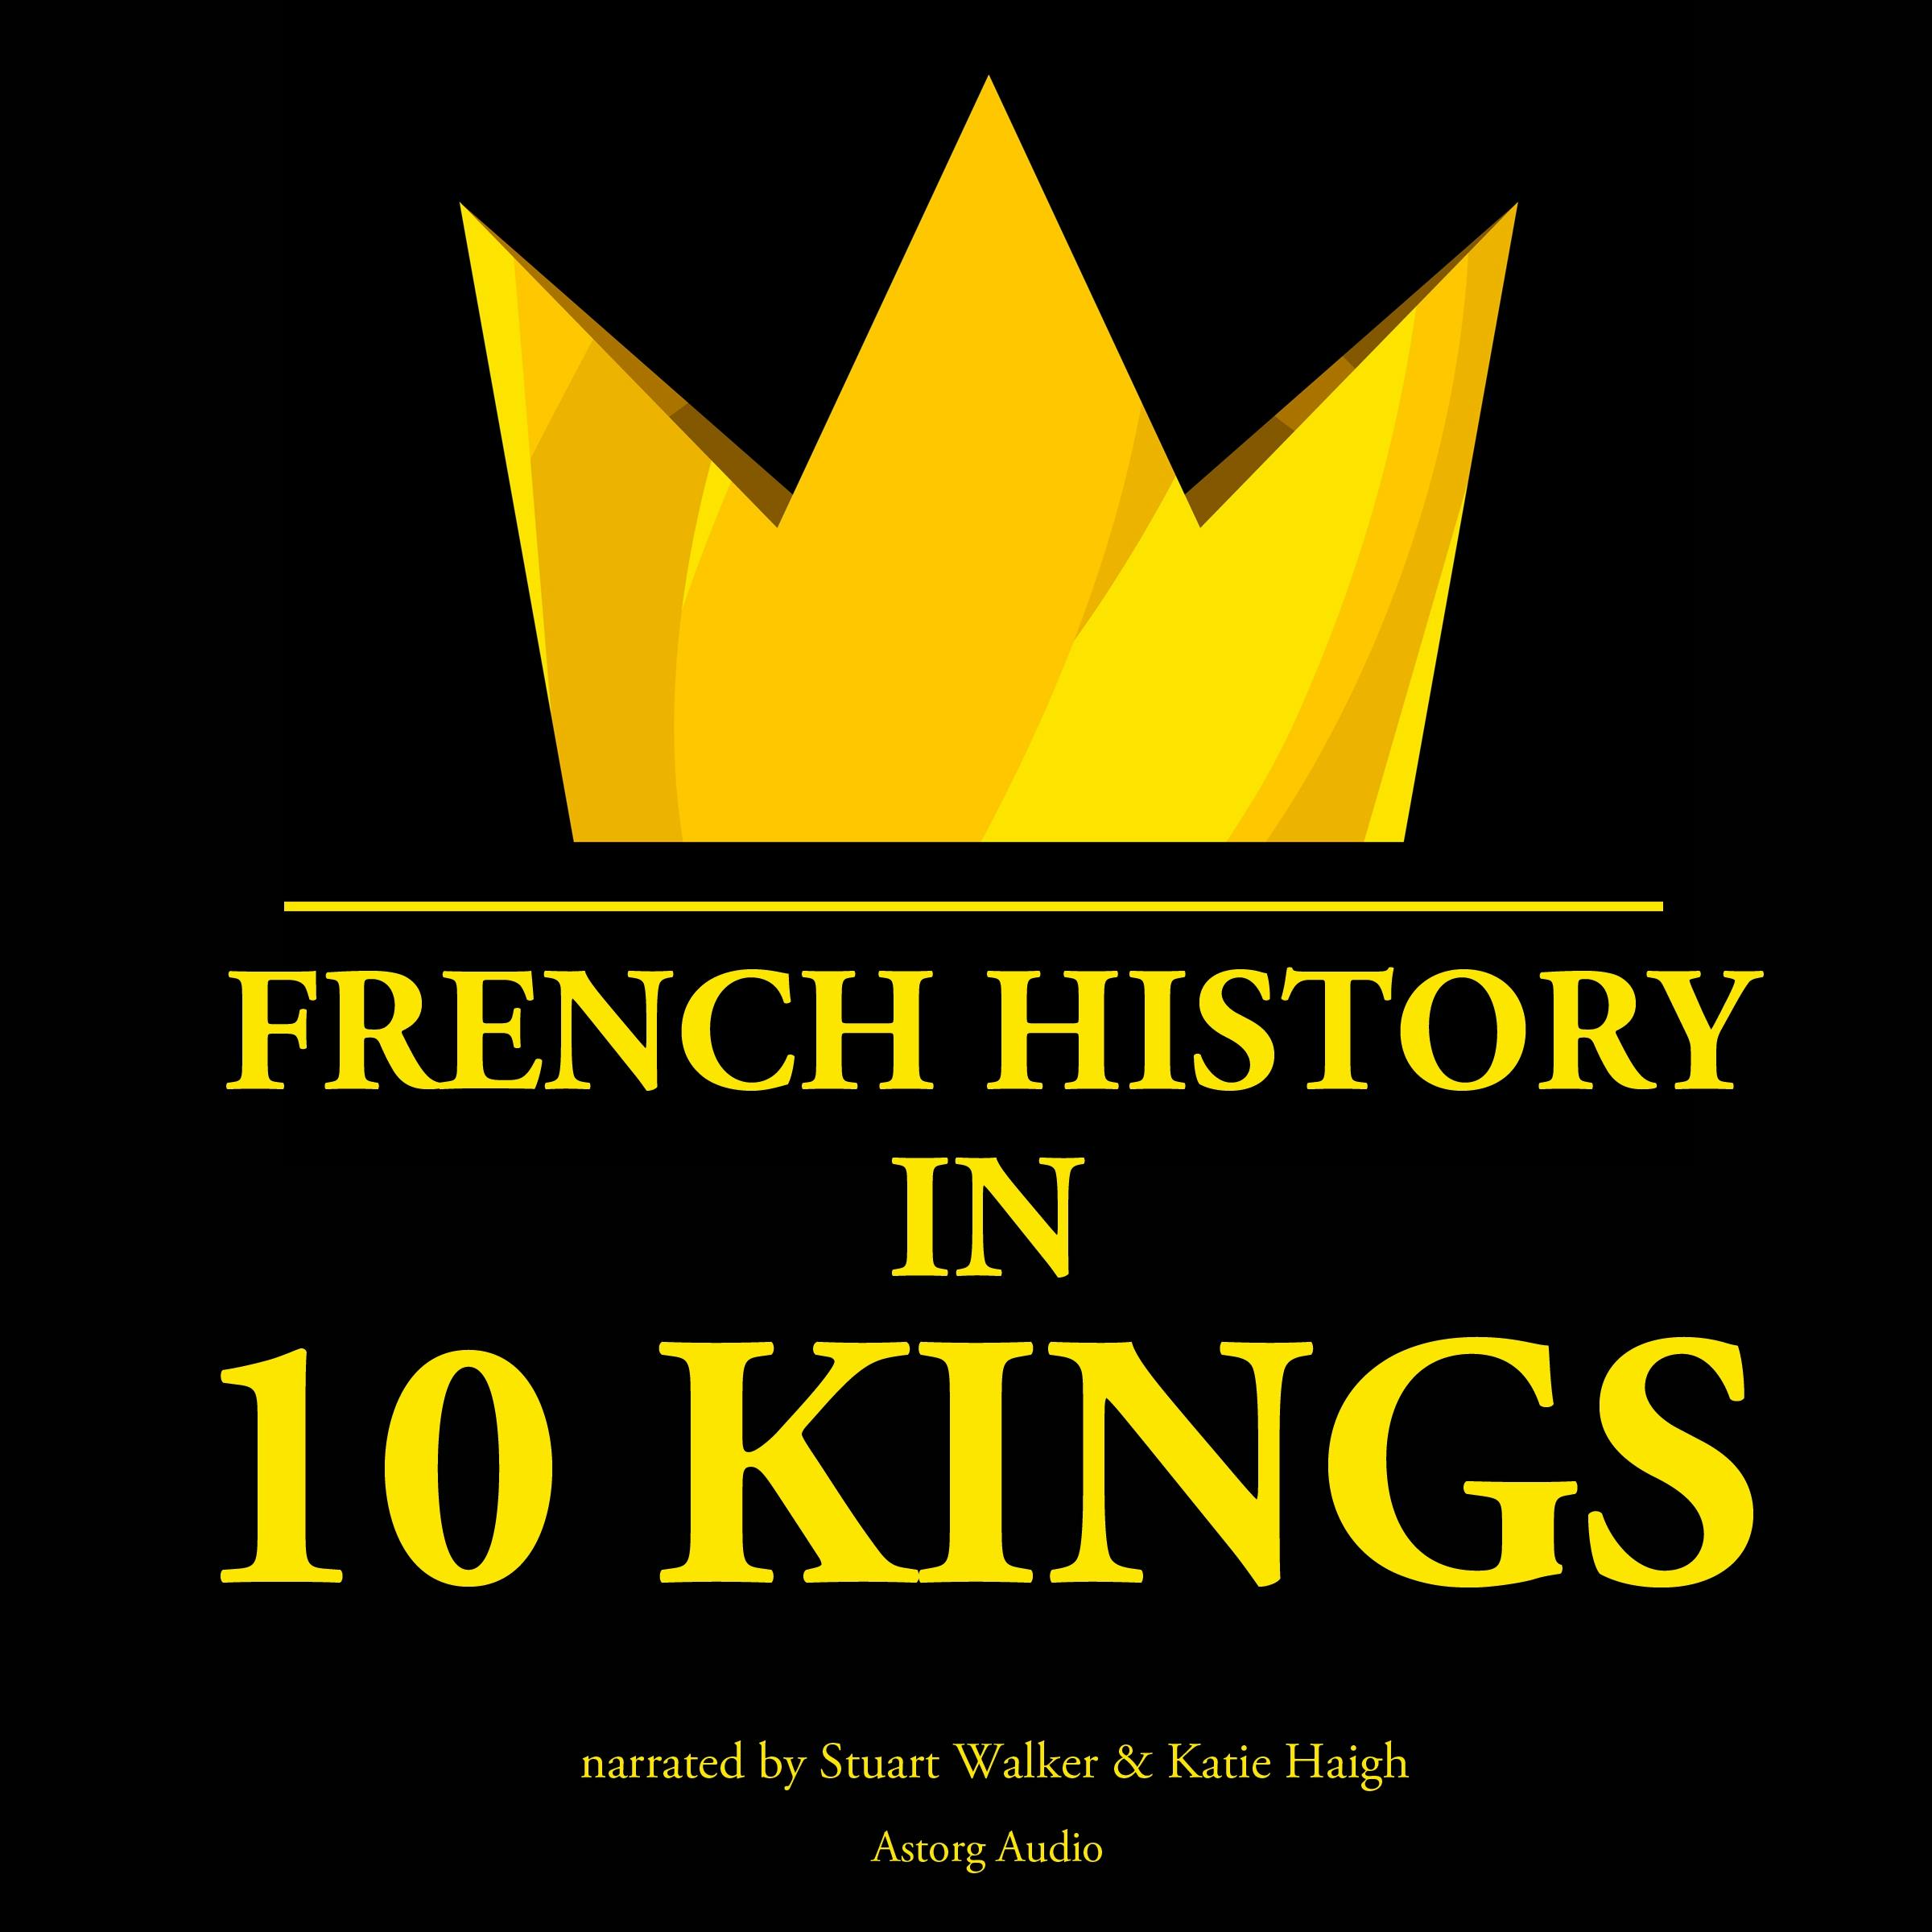 French History in 10 Kings: French History - undefined